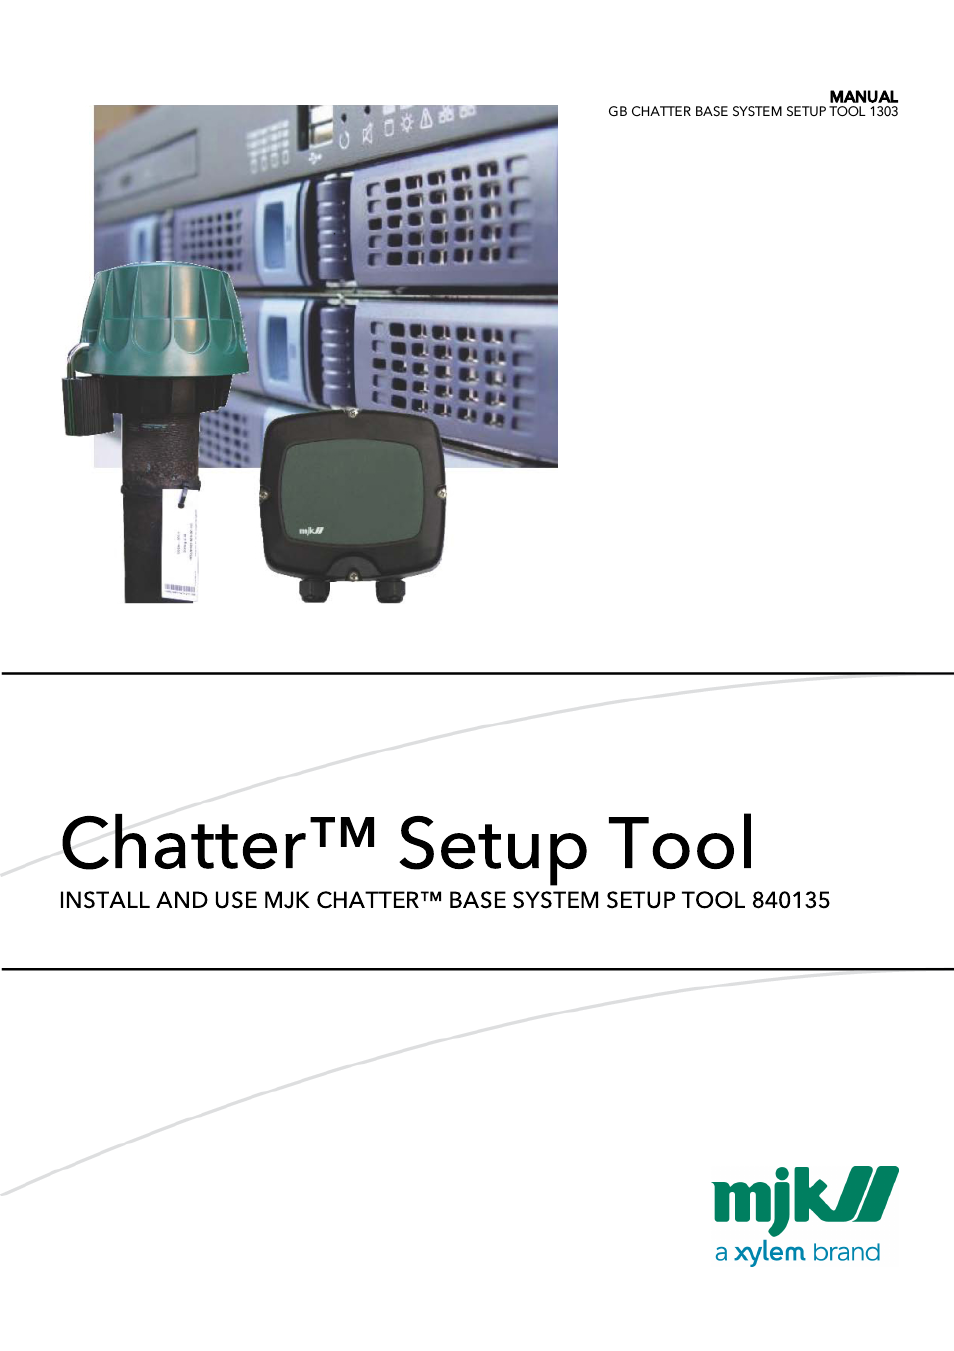 CHATTER Base System Setup Tool Users Guide